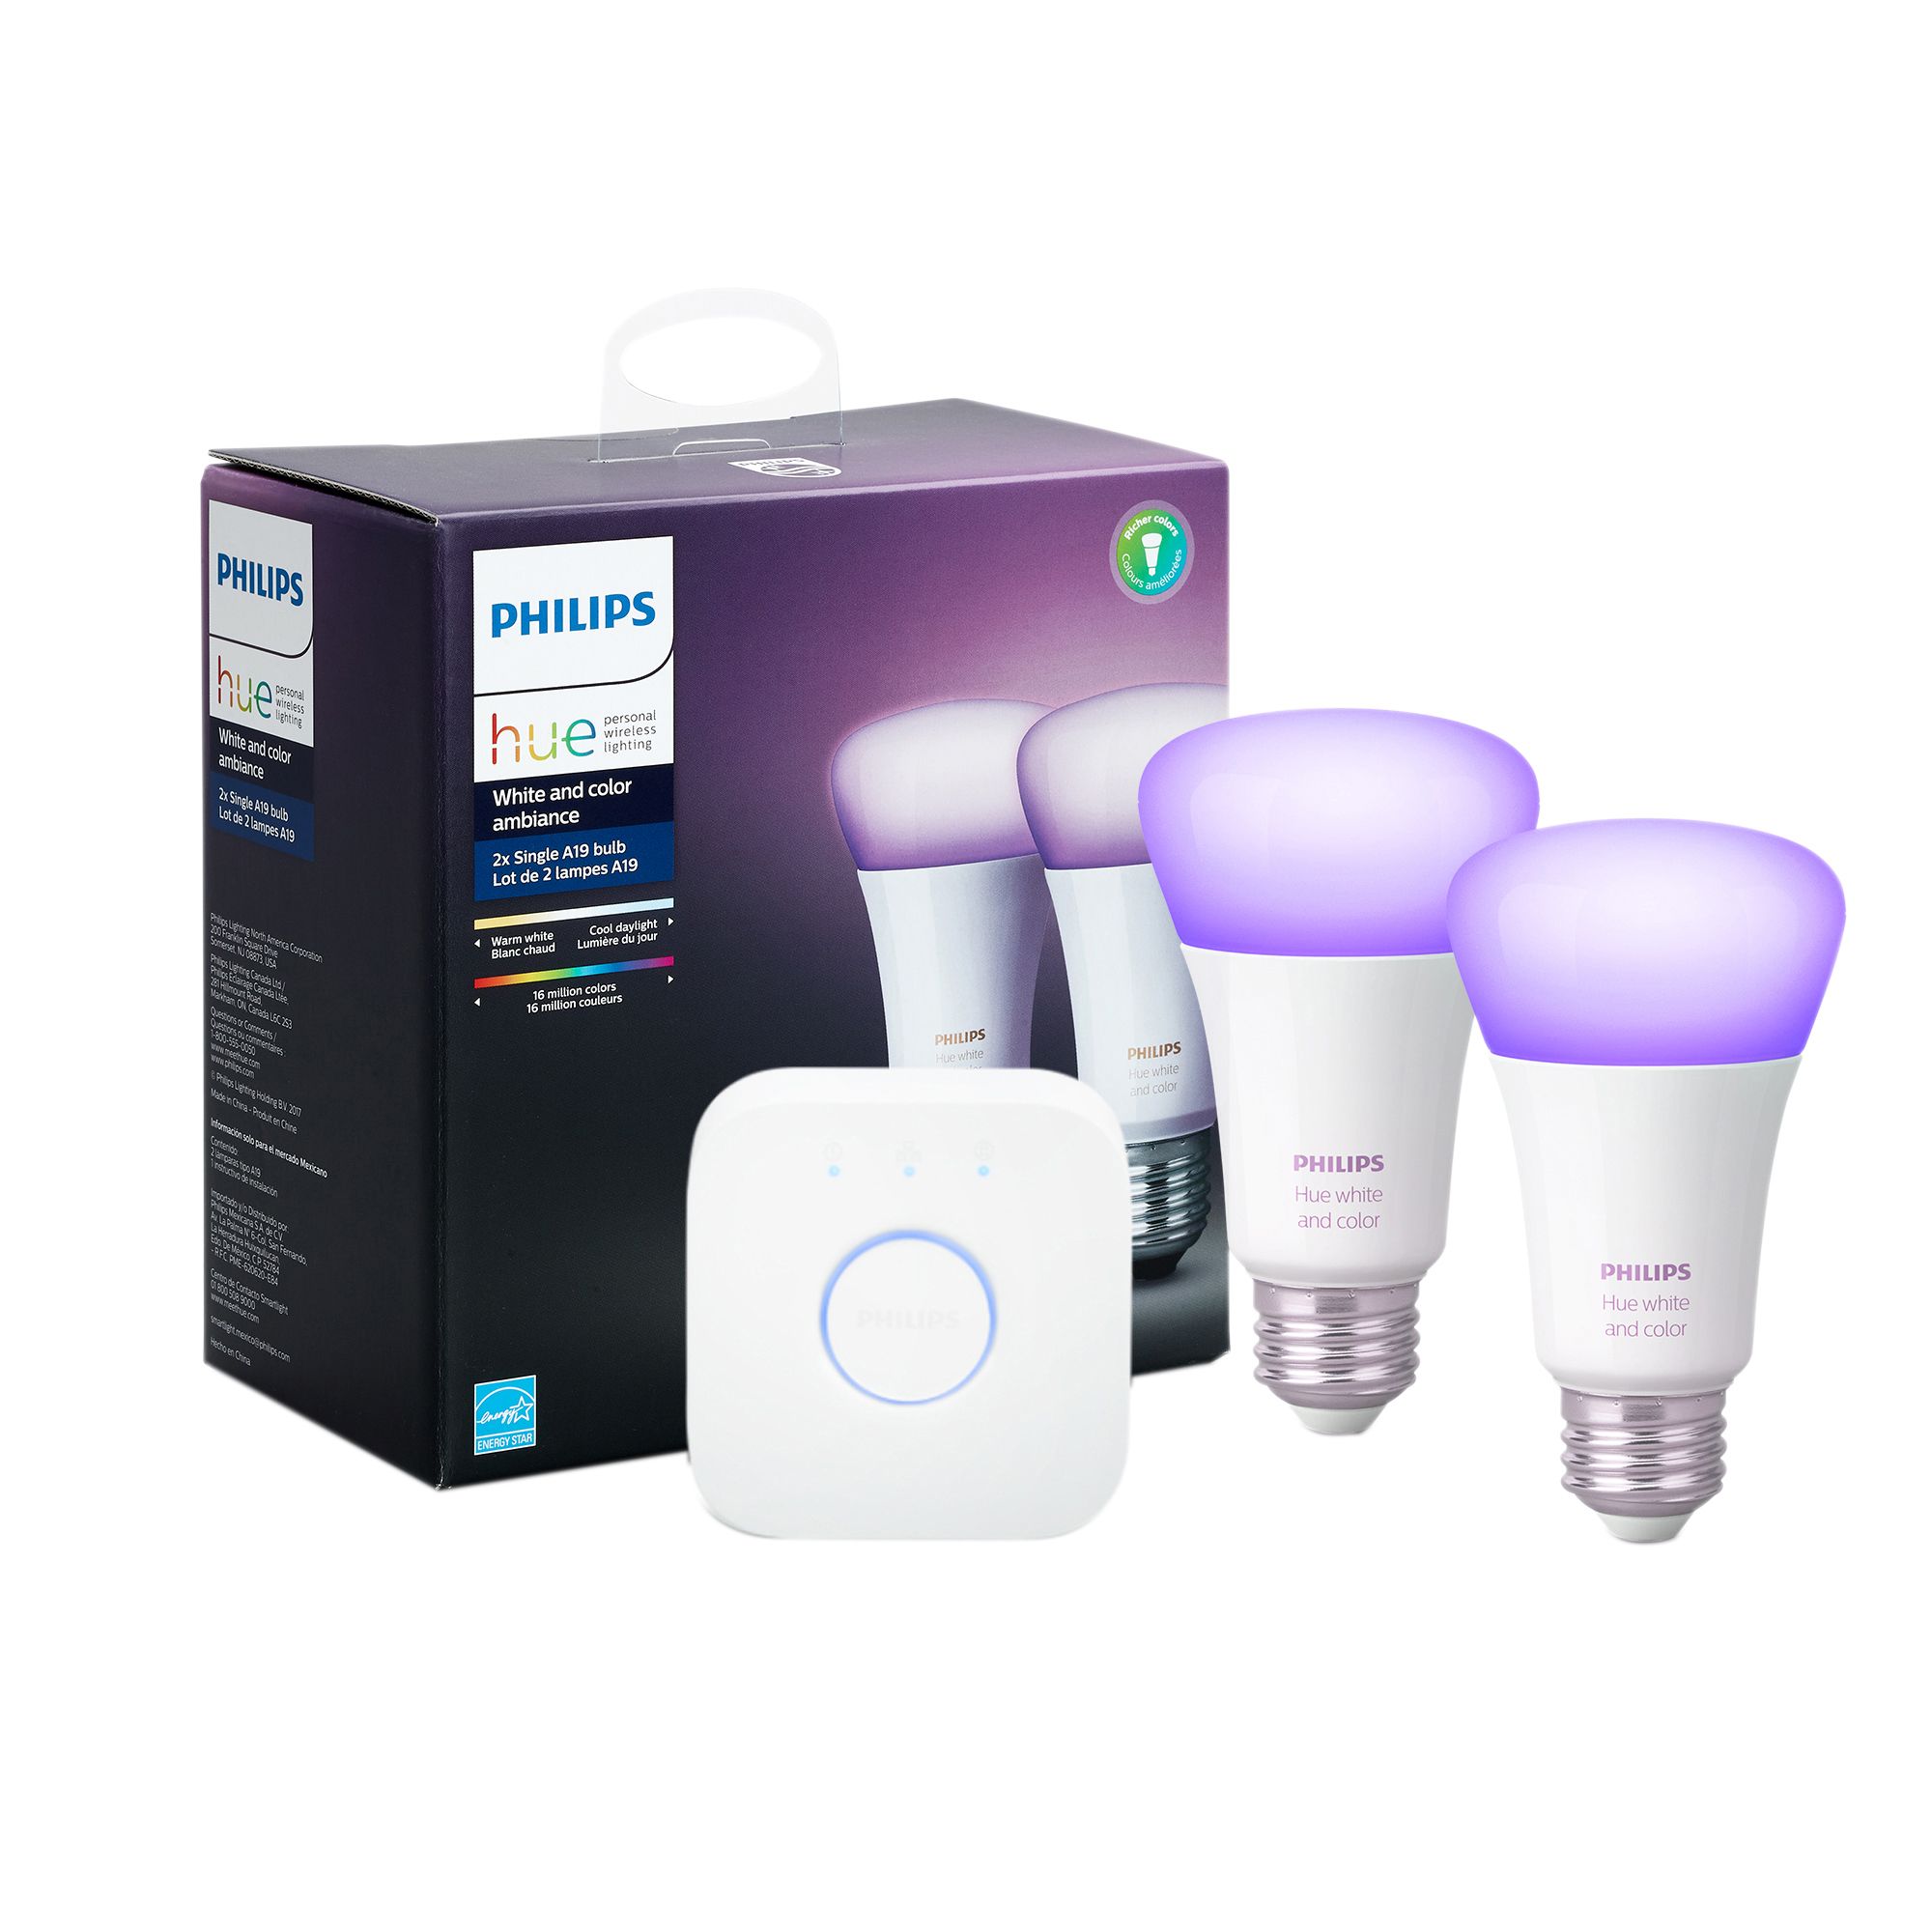 Philips Hue's two-bulb starter kit is on sale with a Hue Bridge